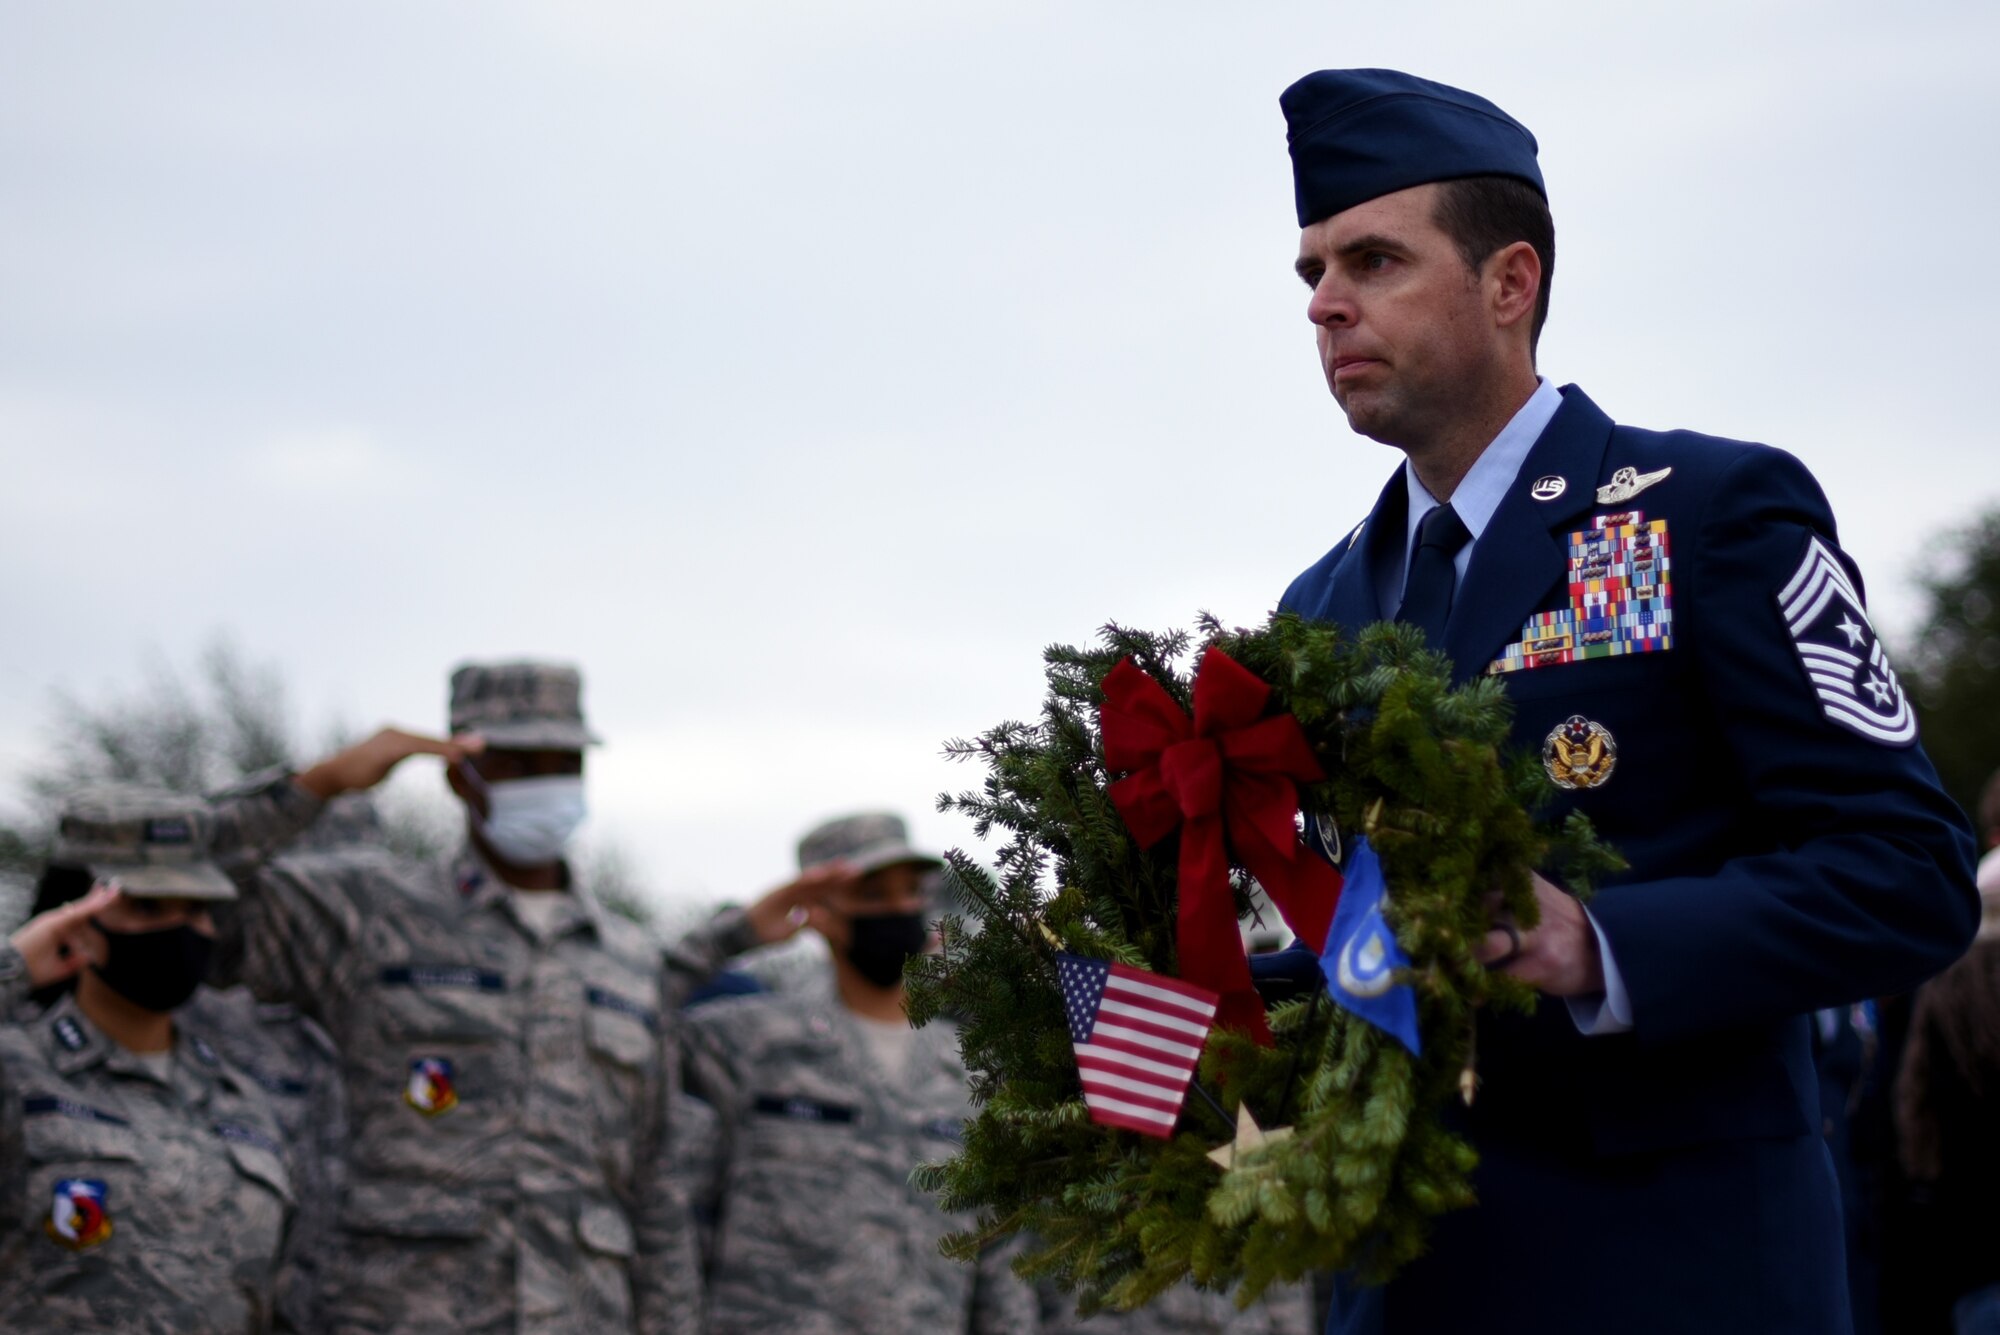 301st Fighter Wing Command Chief Master Sgt. Michael Senigo carries the Air Force wreath during a Wreaths Across America event at the Dallas-Fort Worth National Cemetery on Dec. 18, 2021. Senigo and representatives from each branch laid their respective wreaths to honor their service men and women. (U.S. Air Force photo by Staff Sgt. Randall Moose)